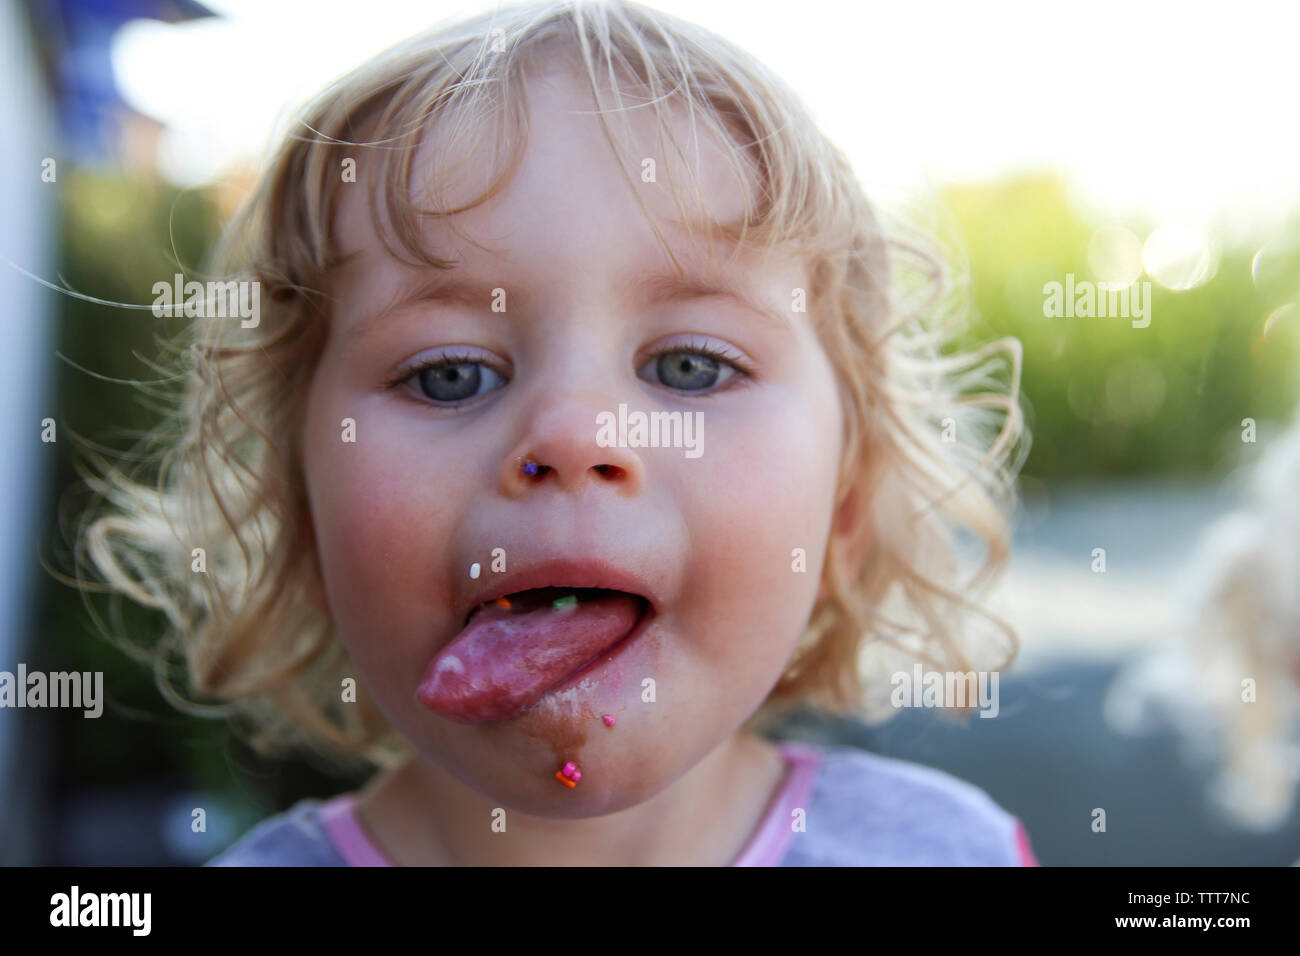 Close-up portrait of girl sticking out tongue Stock Photo